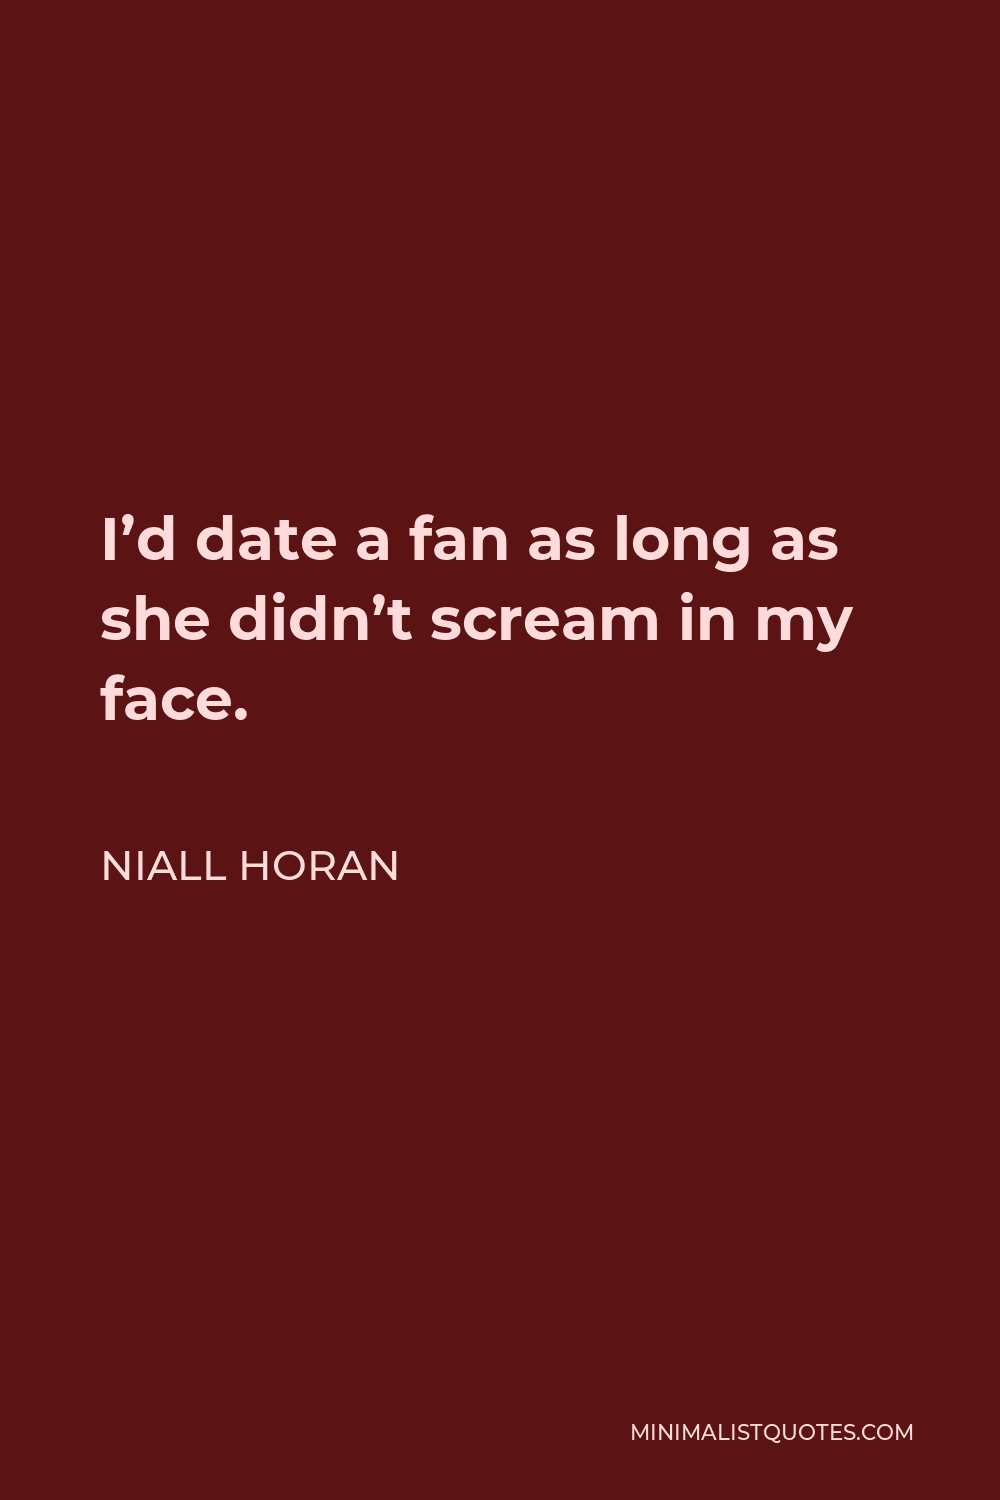 Niall Horan Quote - I’d date a fan as long as she didn’t scream in my face.